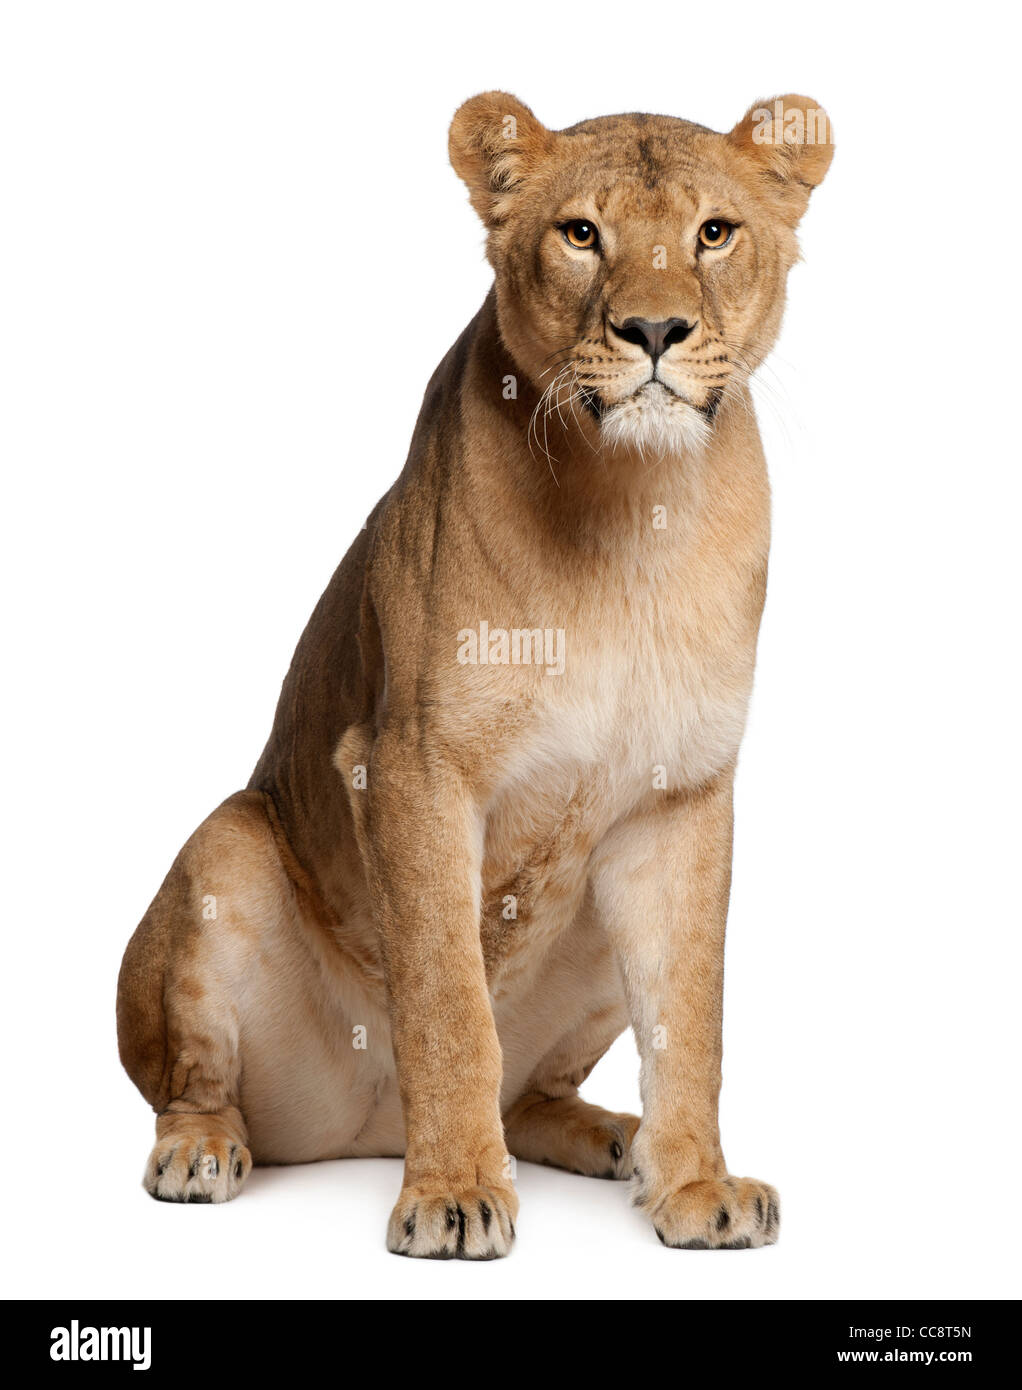 Lionne, Panthera leo, 3 ans, in front of white background Banque D'Images